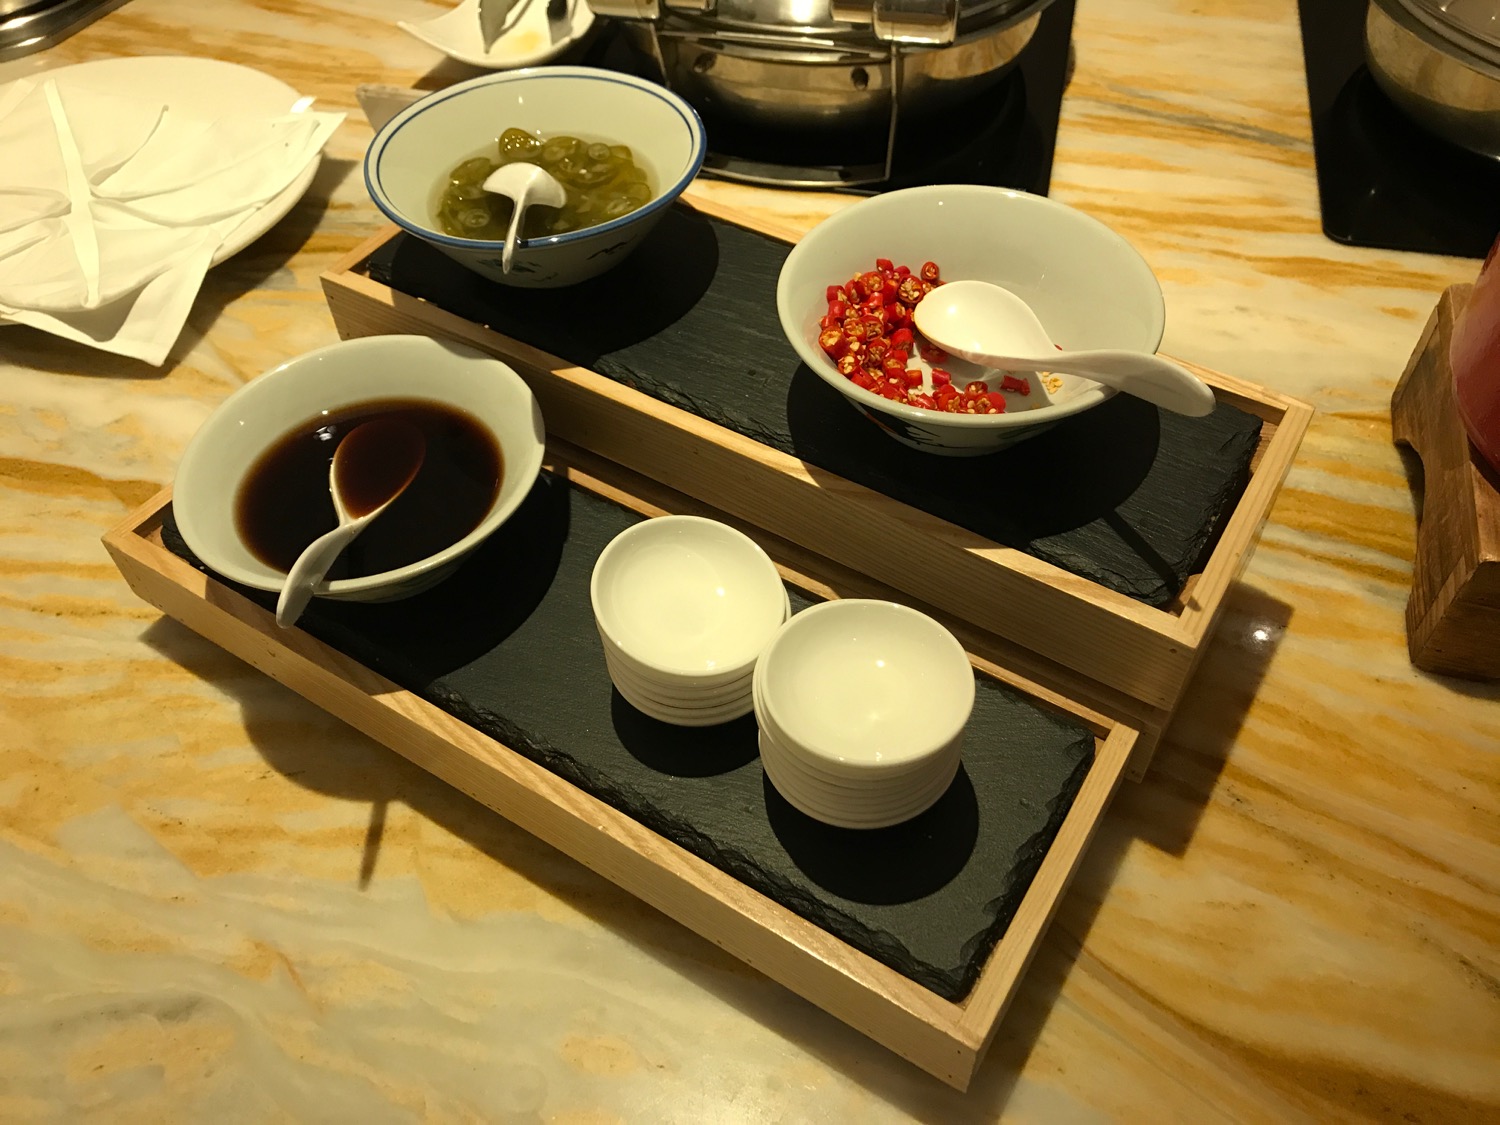 a tray of bowls with sauces and bowls of food